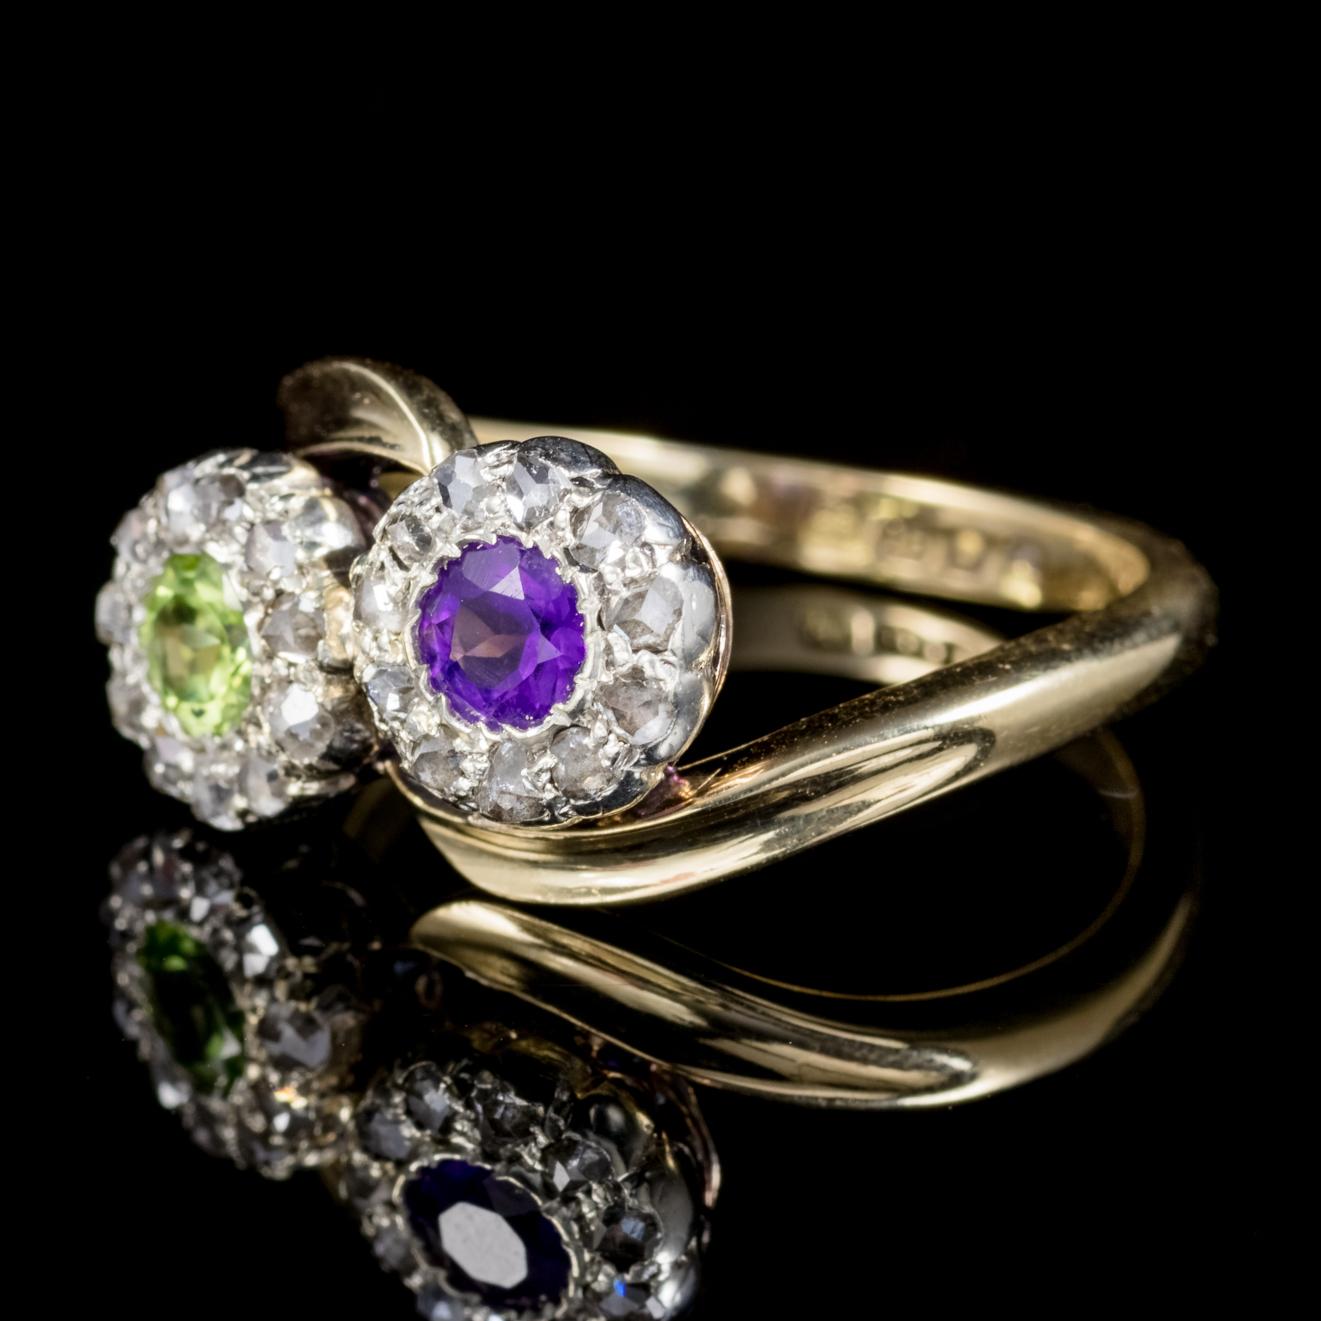 This pretty antique Edwardian ring was designed to represent the Suffragette movement and is fully hallmarked and dated London 1910. 

The front of the ring features a lovely violet 0.22ct Amethyst accompanied by a green 0.22ct Peridot in a lovely